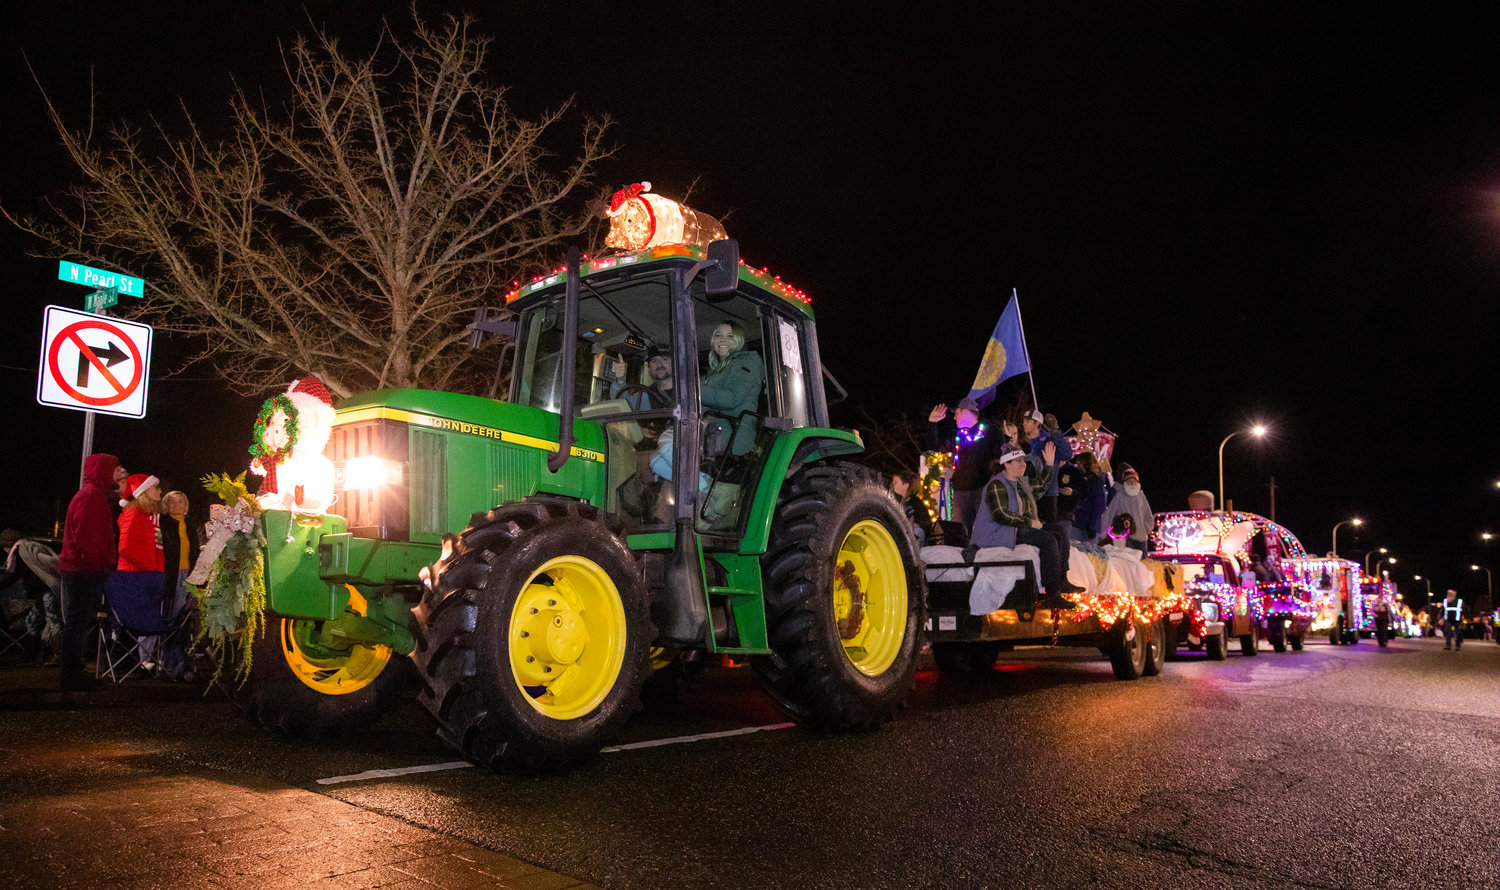 Pigs illuminate a John Deere tractor as crowds gather for the Lighted Tractor Parade Saturday night in downtown Centralia.